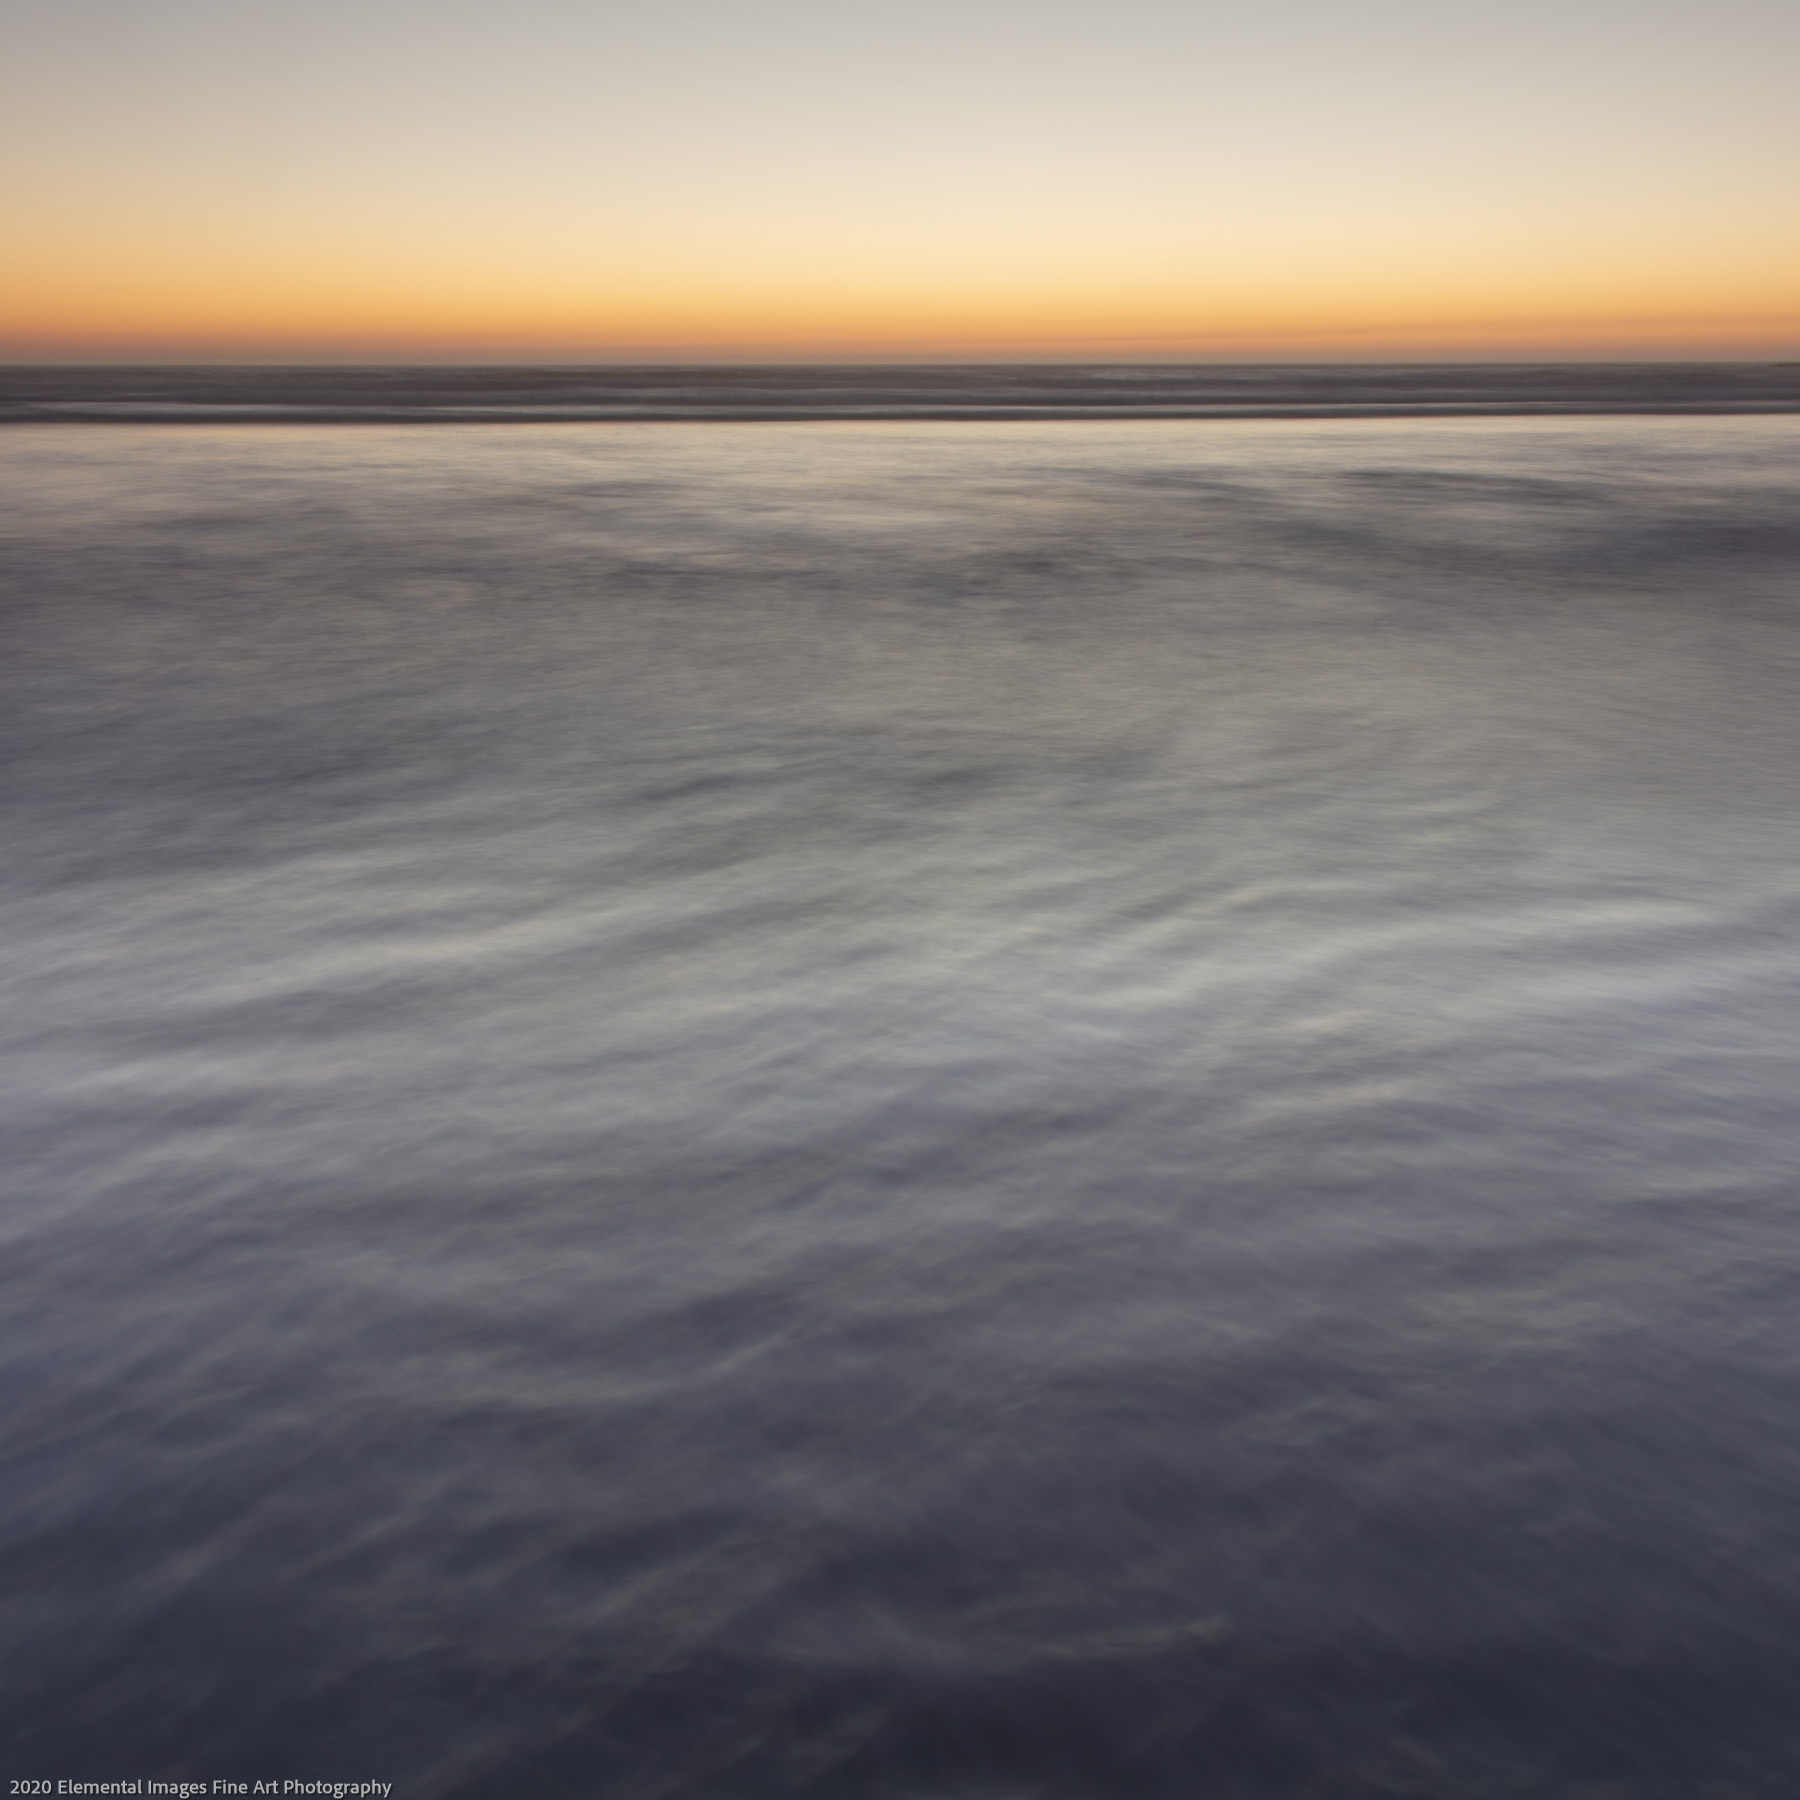 Sea and Sky #106 | Myers Creek Beach | OR | USA - © 2020 Elemental Images Fine Art Photography - All Rights Reserved Worldwide